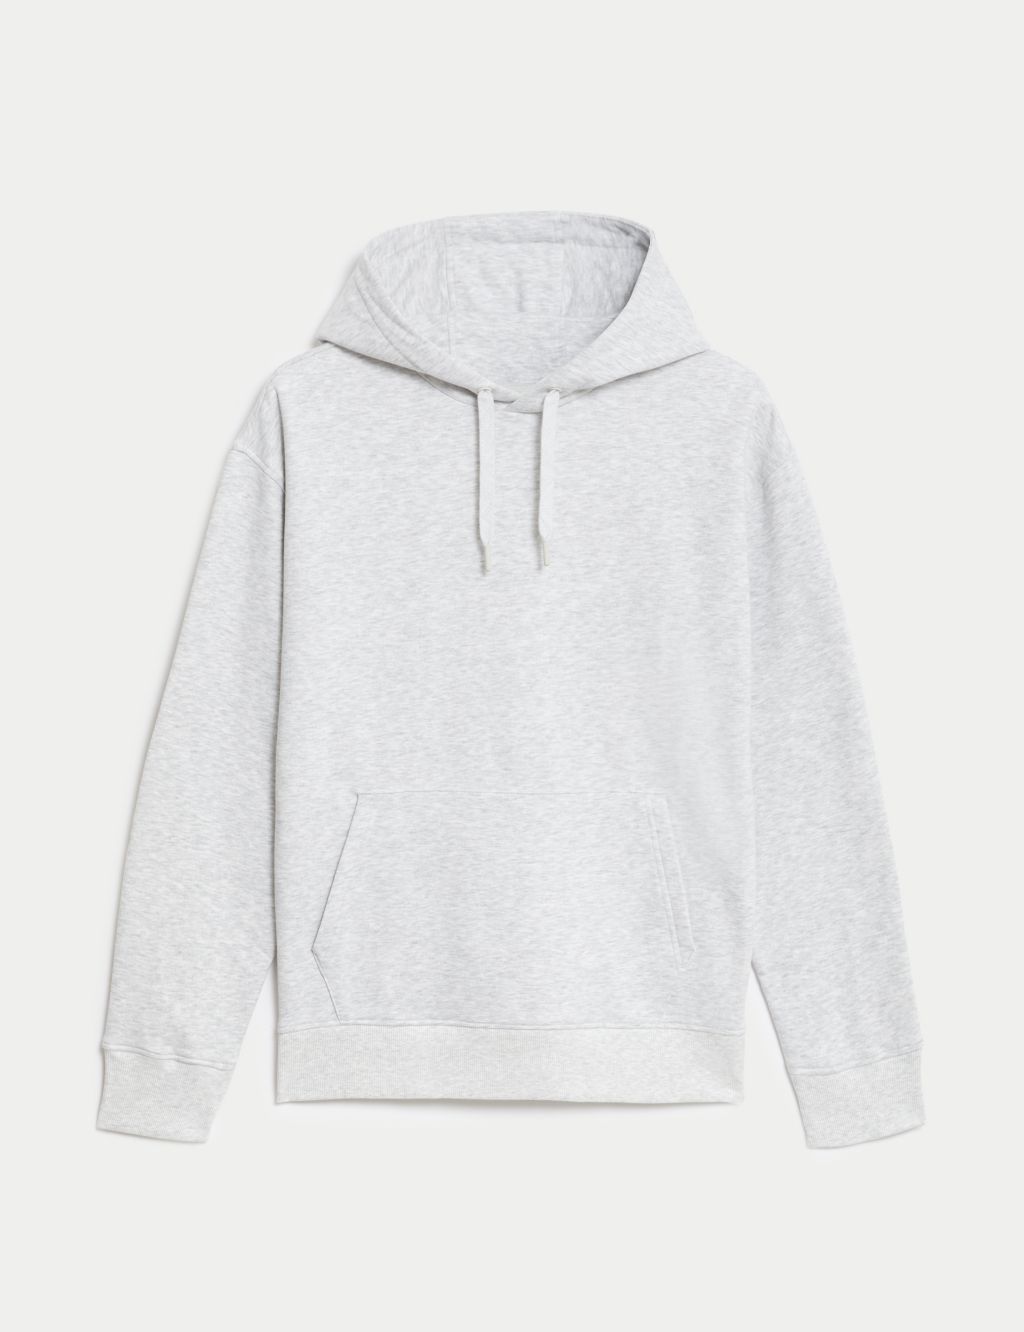 Oversized Cotton Rich Hoodie image 2